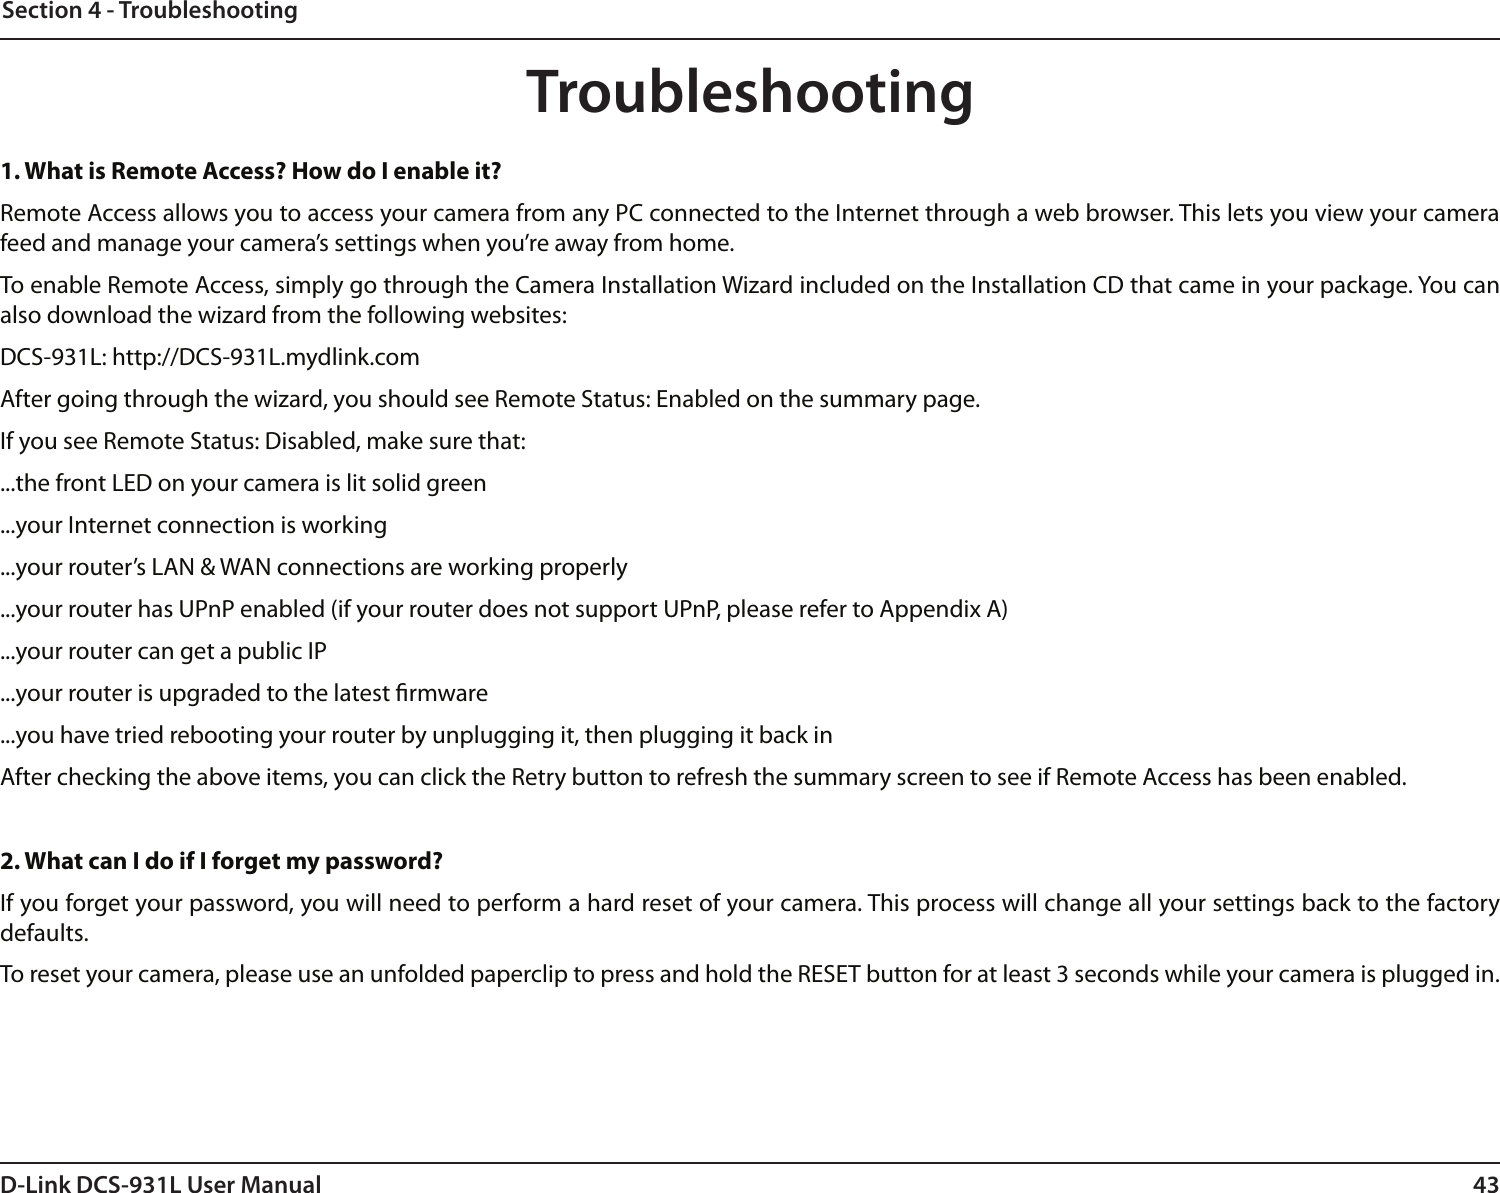 43D-Link DCS-931L User ManualSection 4 - TroubleshootingTroubleshooting1. What is Remote Access? How do I enable it?Remote Access allows you to access your camera from any PC connected to the Internet through a web browser. This lets you view your camera feed and manage your camera’s settings when you’re away from home. To enable Remote Access, simply go through the Camera Installation Wizard included on the Installation CD that came in your package. You can also download the wizard from the following websites:DCS-931L: http://DCS-931L.mydlink.comAfter going through the wizard, you should see Remote Status: Enabled on the summary page.If you see Remote Status: Disabled, make sure that:...the front LED on your camera is lit solid green...your Internet connection is working...your router’s LAN &amp; WAN connections are working properly...your router has UPnP enabled (if your router does not support UPnP, please refer to Appendix A)...your router can get a public IP...your router is upgraded to the latest rmware...you have tried rebooting your router by unplugging it, then plugging it back inAfter checking the above items, you can click the Retry button to refresh the summary screen to see if Remote Access has been enabled.2. What can I do if I forget my password?If you forget your password, you will need to perform a hard reset of your camera. This process will change all your settings back to the factory defaults.To reset your camera, please use an unfolded paperclip to press and hold the RESET button for at least 3 seconds while your camera is plugged in.